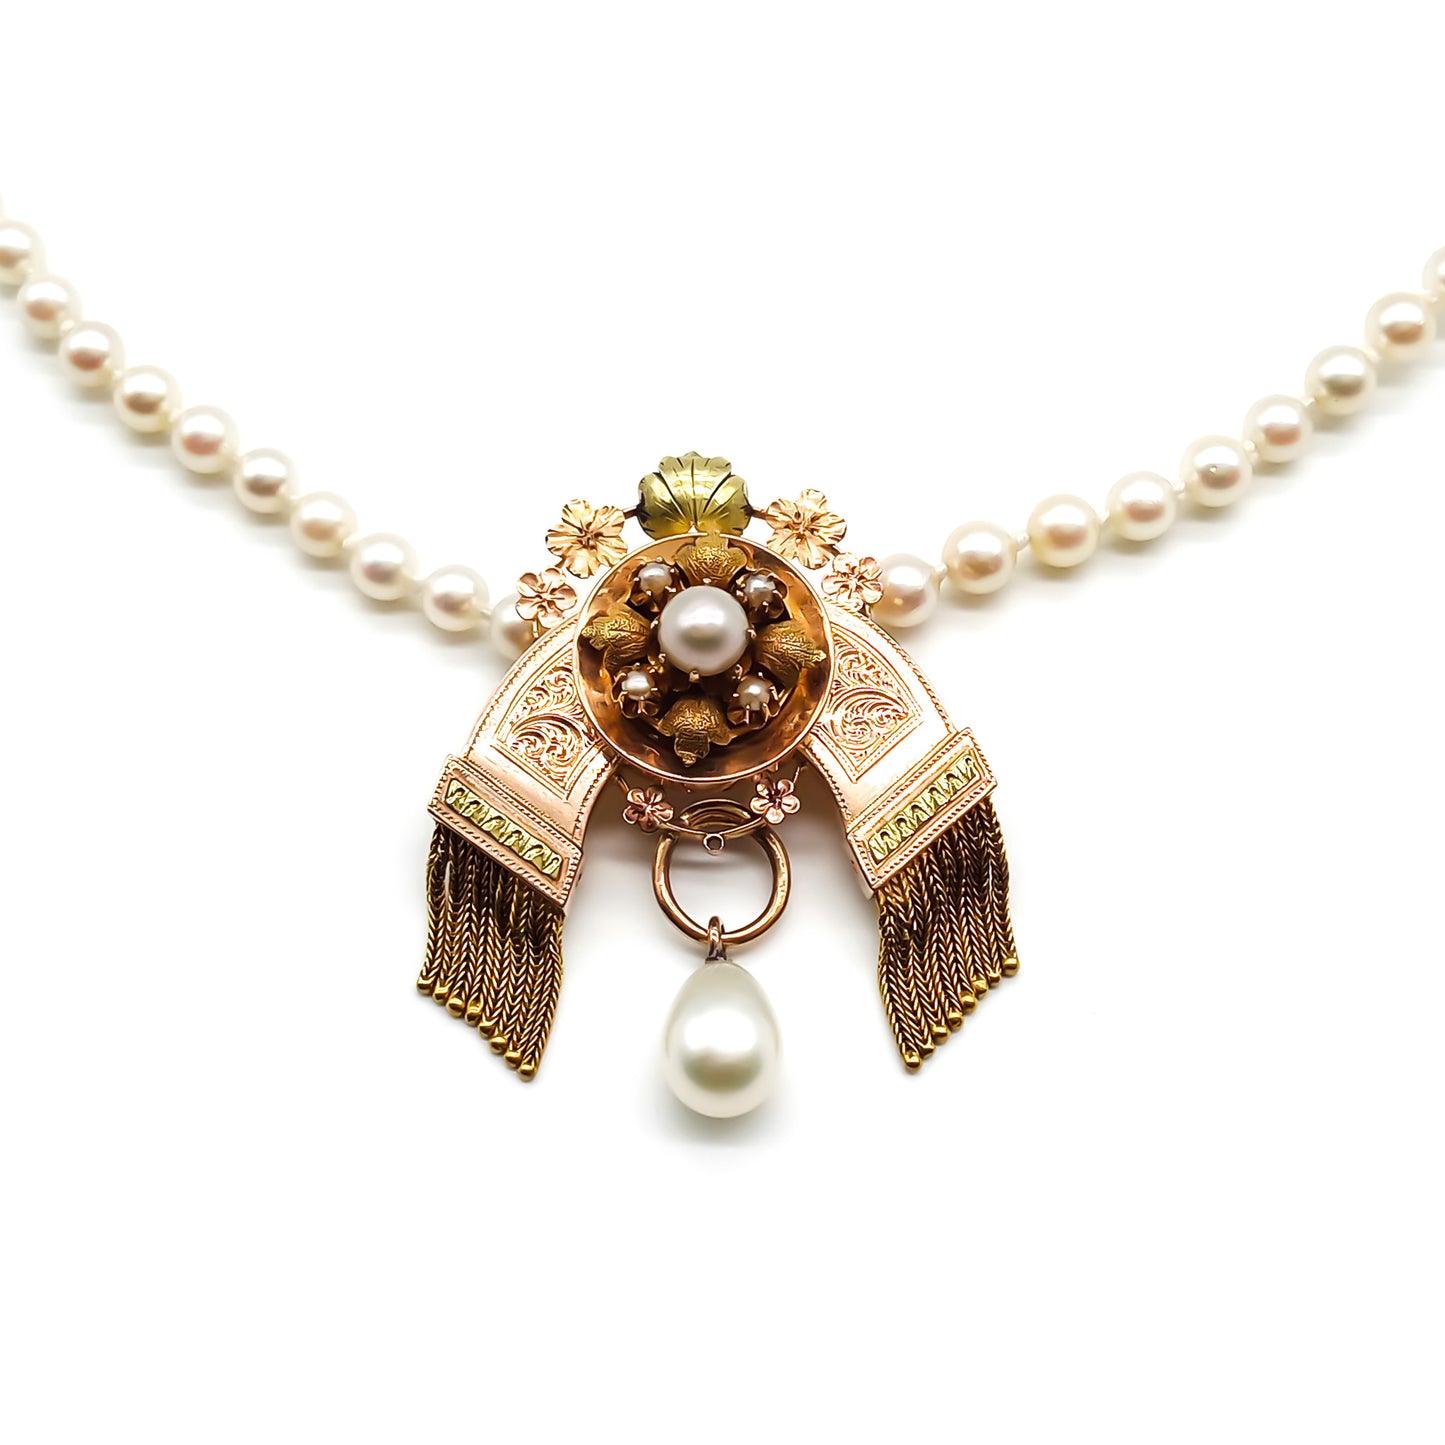 Very ornate Victorian rose and yellow gold tassel pendant with a pearl drop, fastened onto a string of small lustrous pearls with a gold clasp.